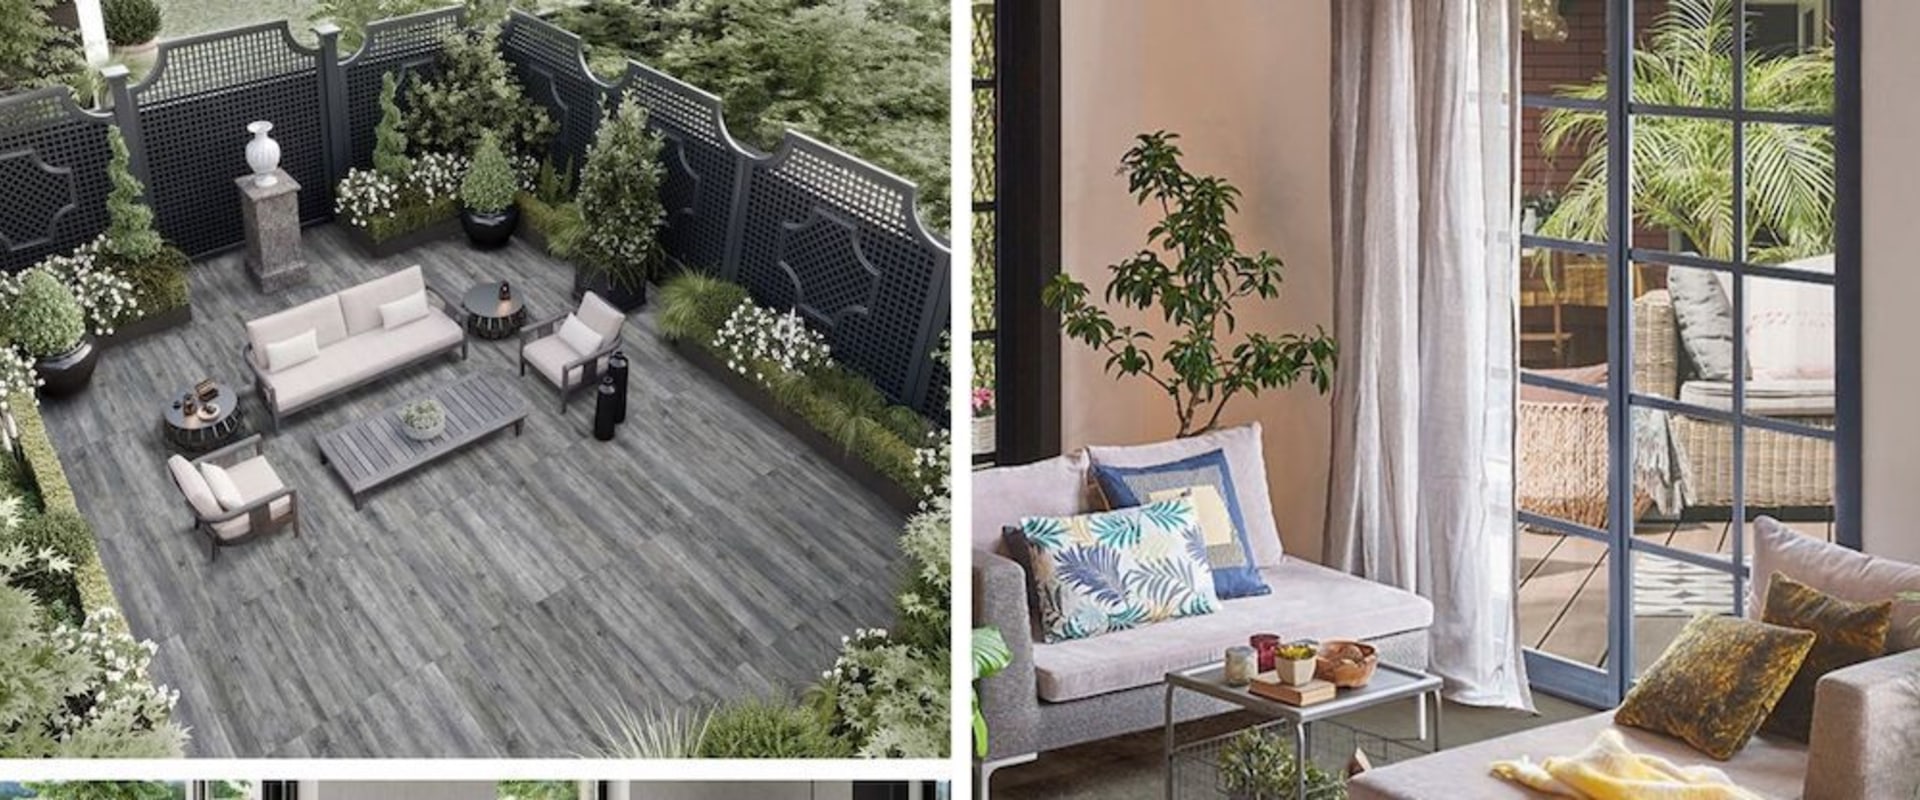 Flooring Options for Outdoor Living Spaces